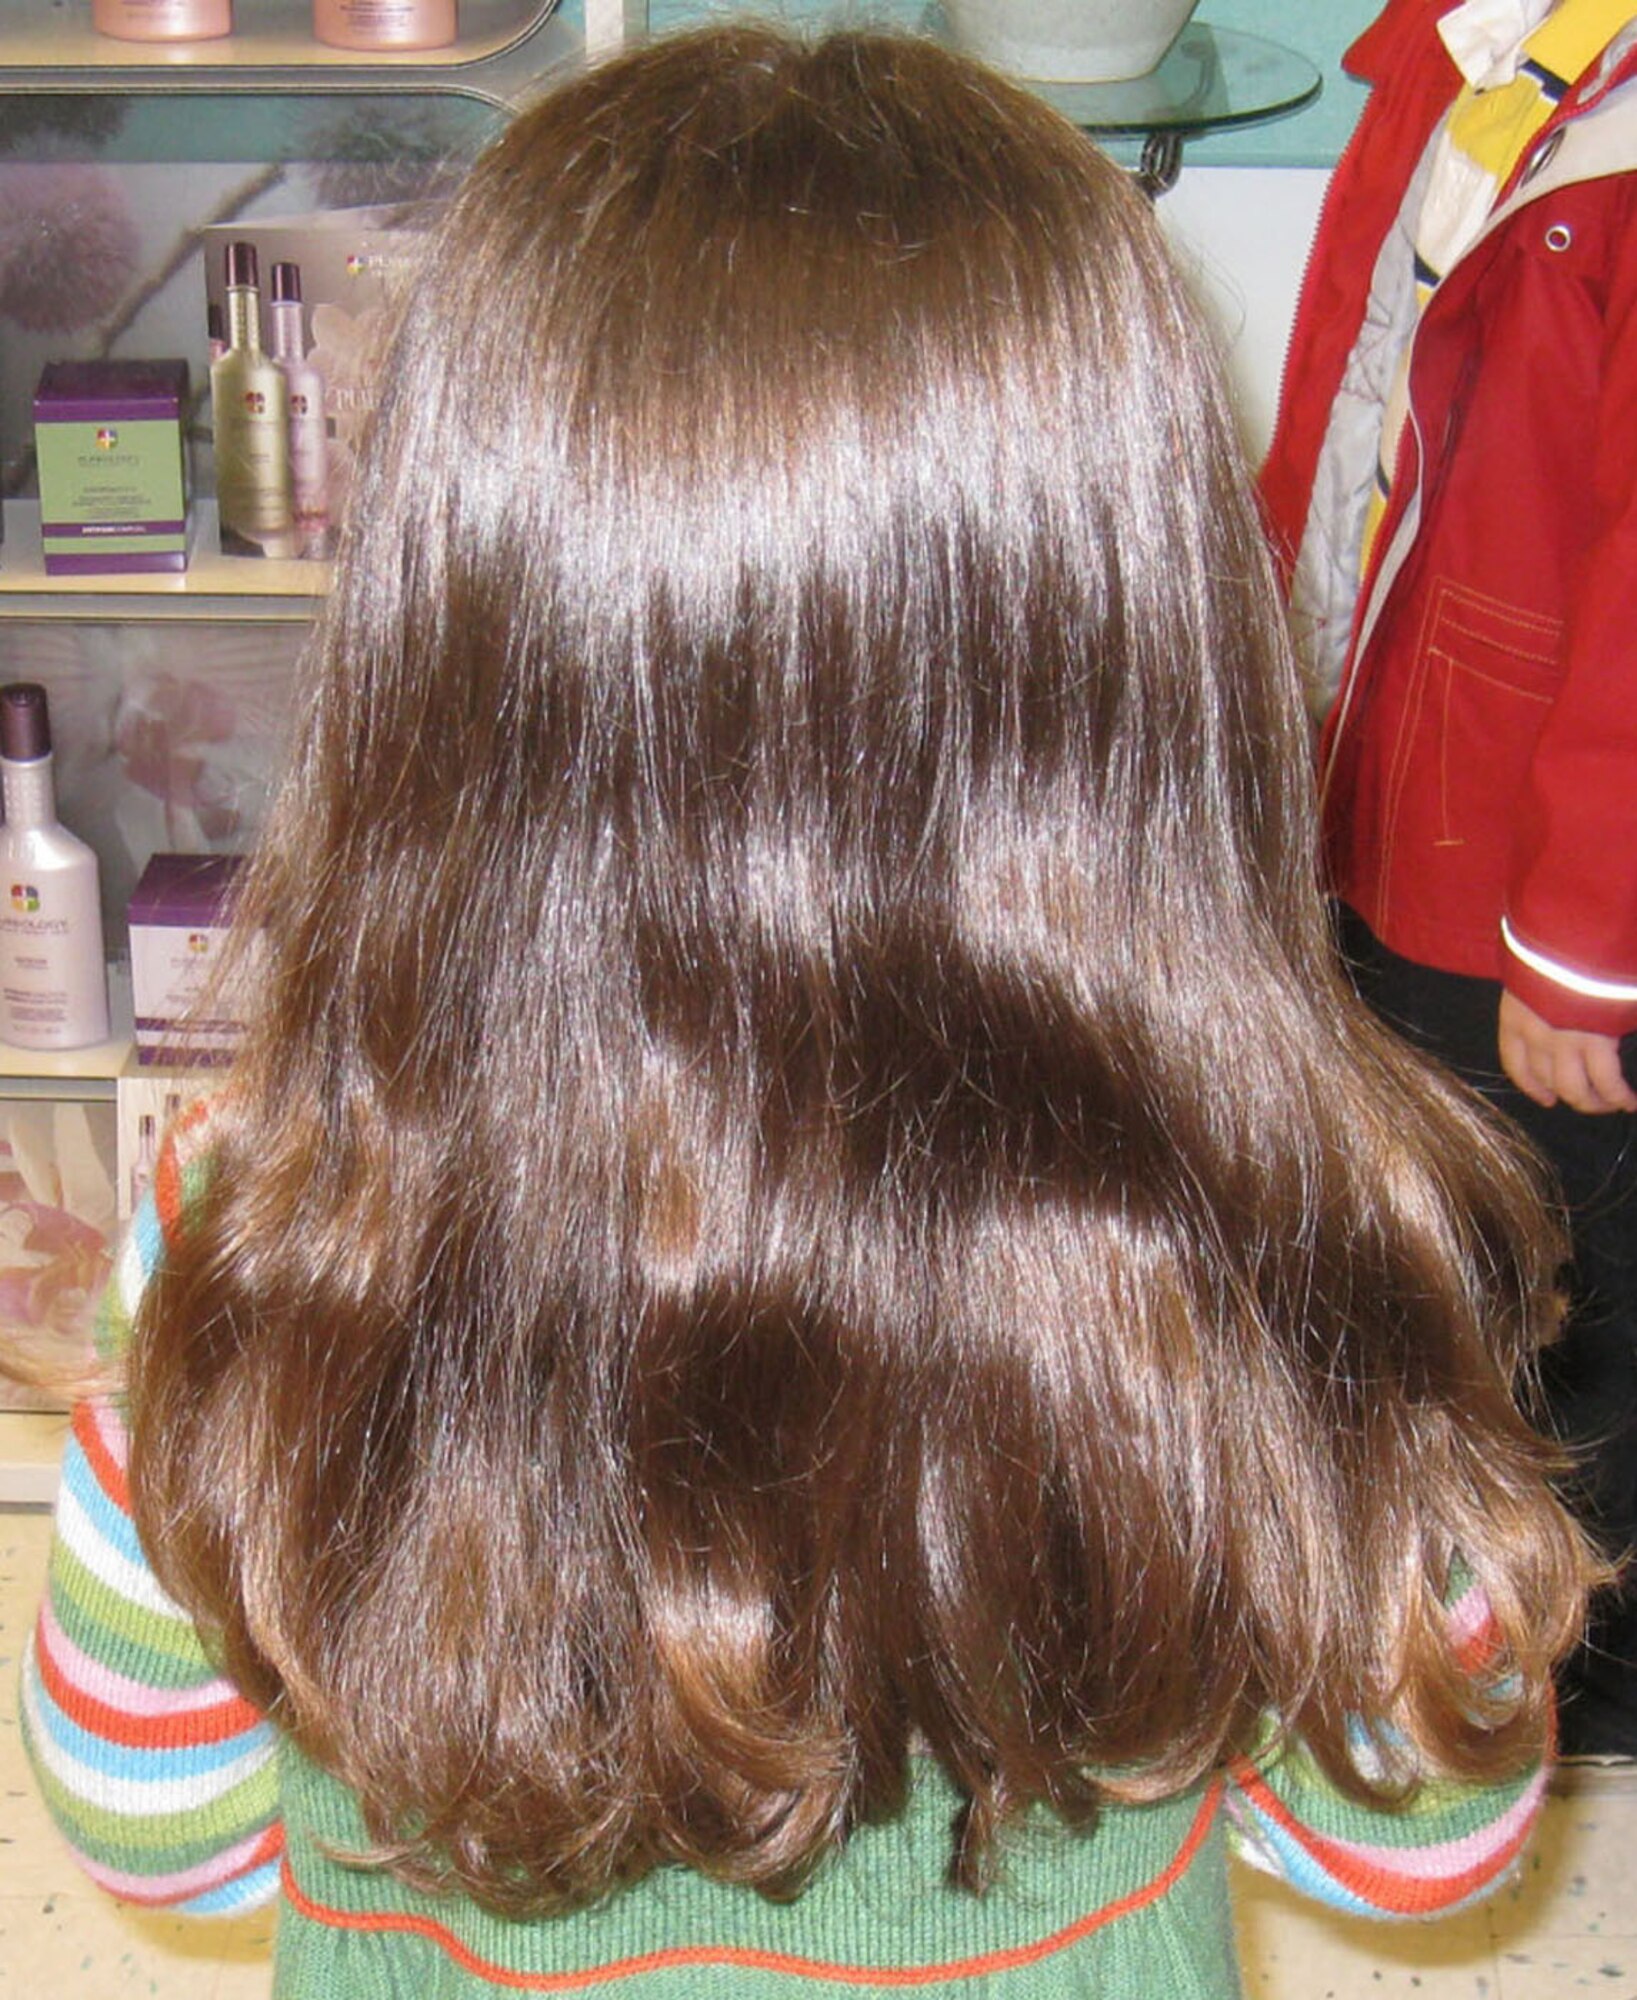 Long and luxurious - this is how 4-year-old Noel Ingram's hair used to look, before she had it cut short. She donated the cut hair to "Locks of Love" - a non-profit organization providing hairpieces to financially disadvantaged children, in the United States and Canada, who suffer from long-term medical hair loss from any diagnosis. (Courtesy photo by Sarah Kite)